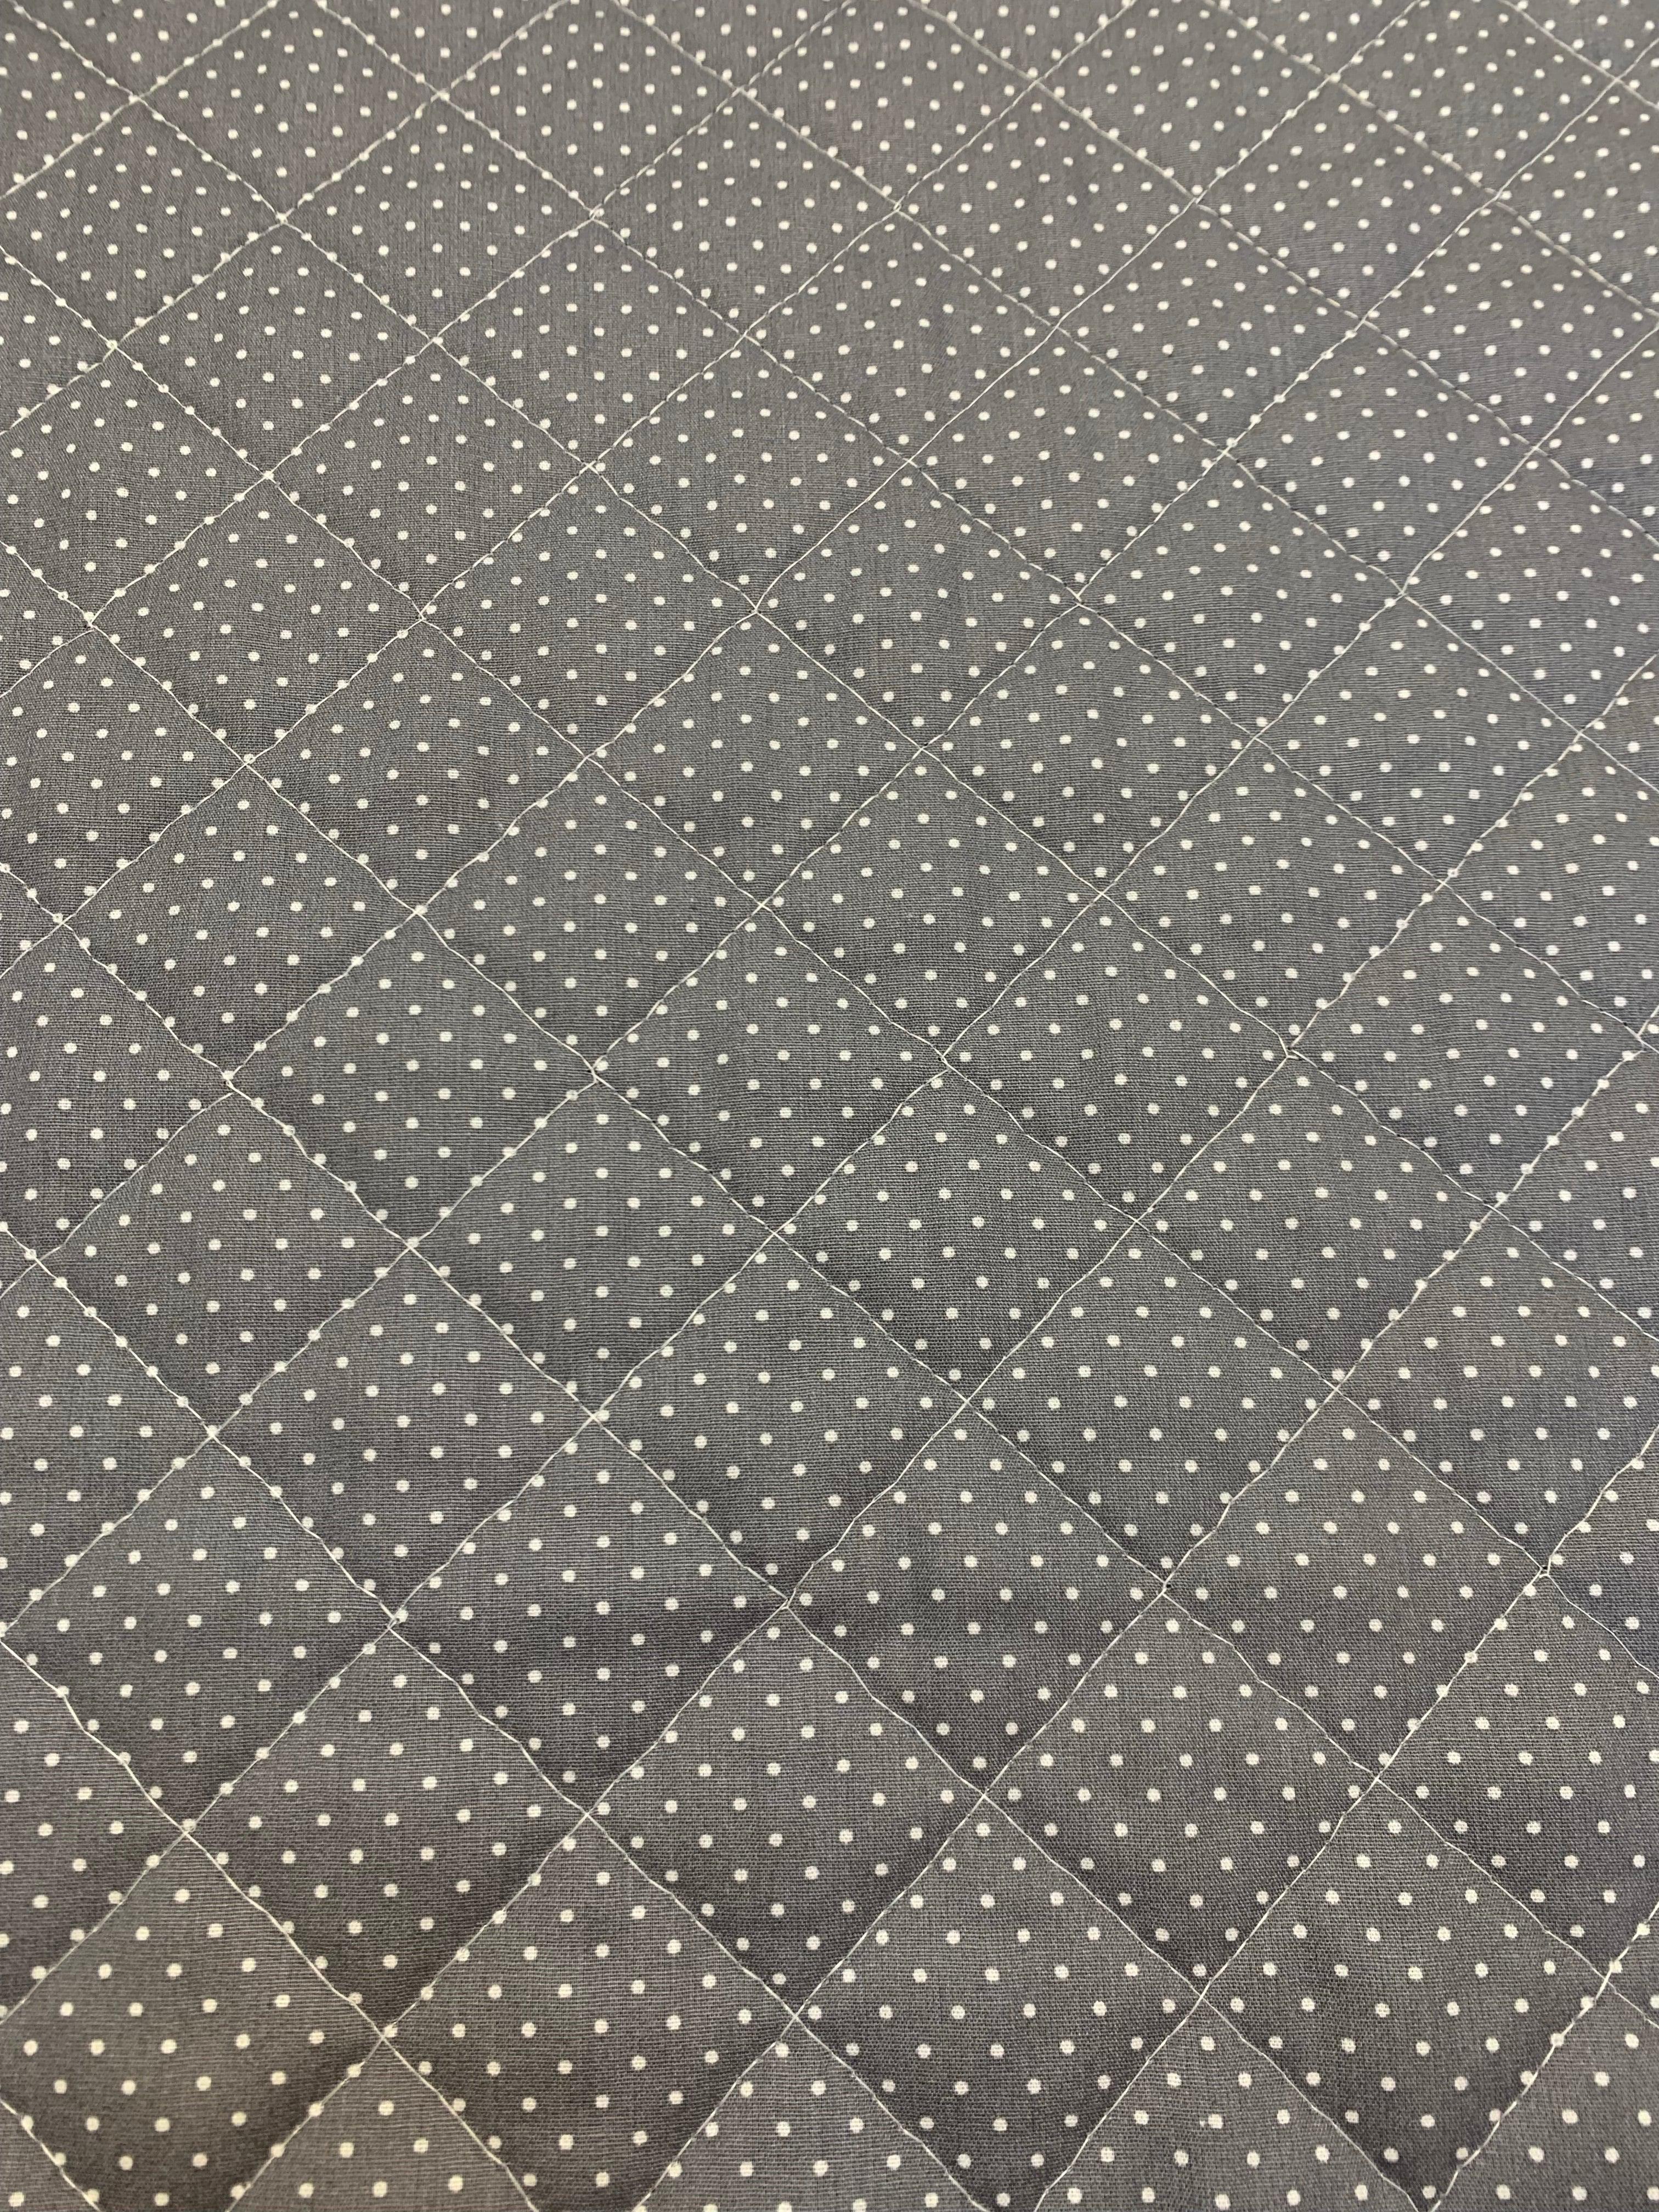 Stars and Dots Grey and White Reversible Quilted Fabric